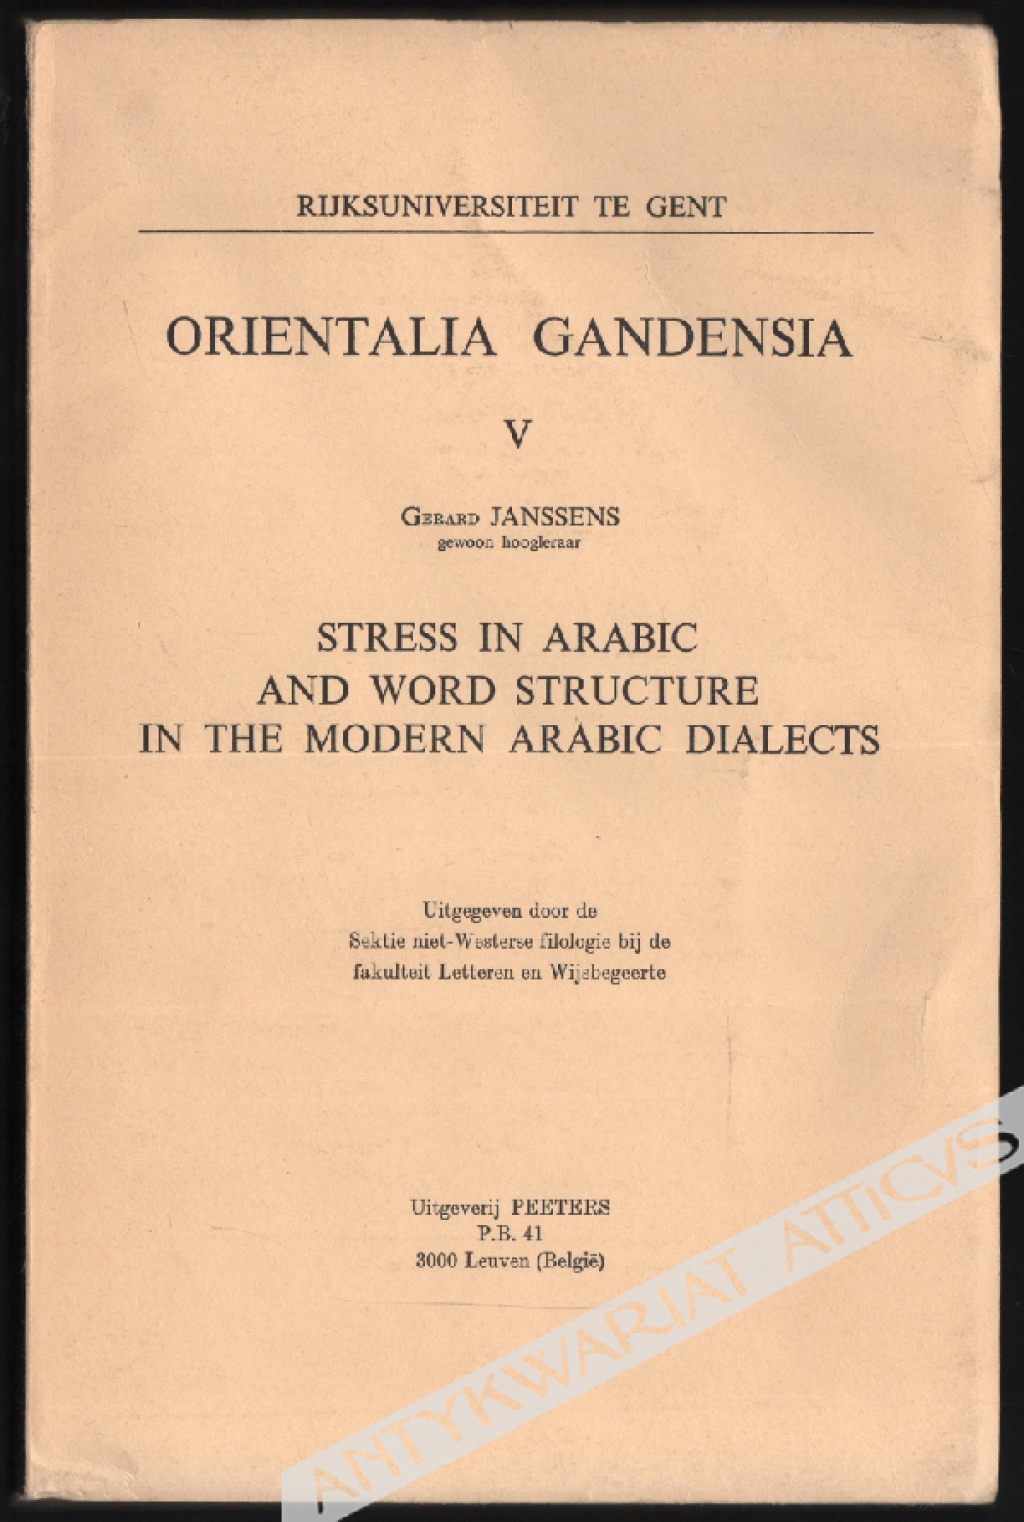 Stress in Arabic and word structure in the modern Arabic dialects